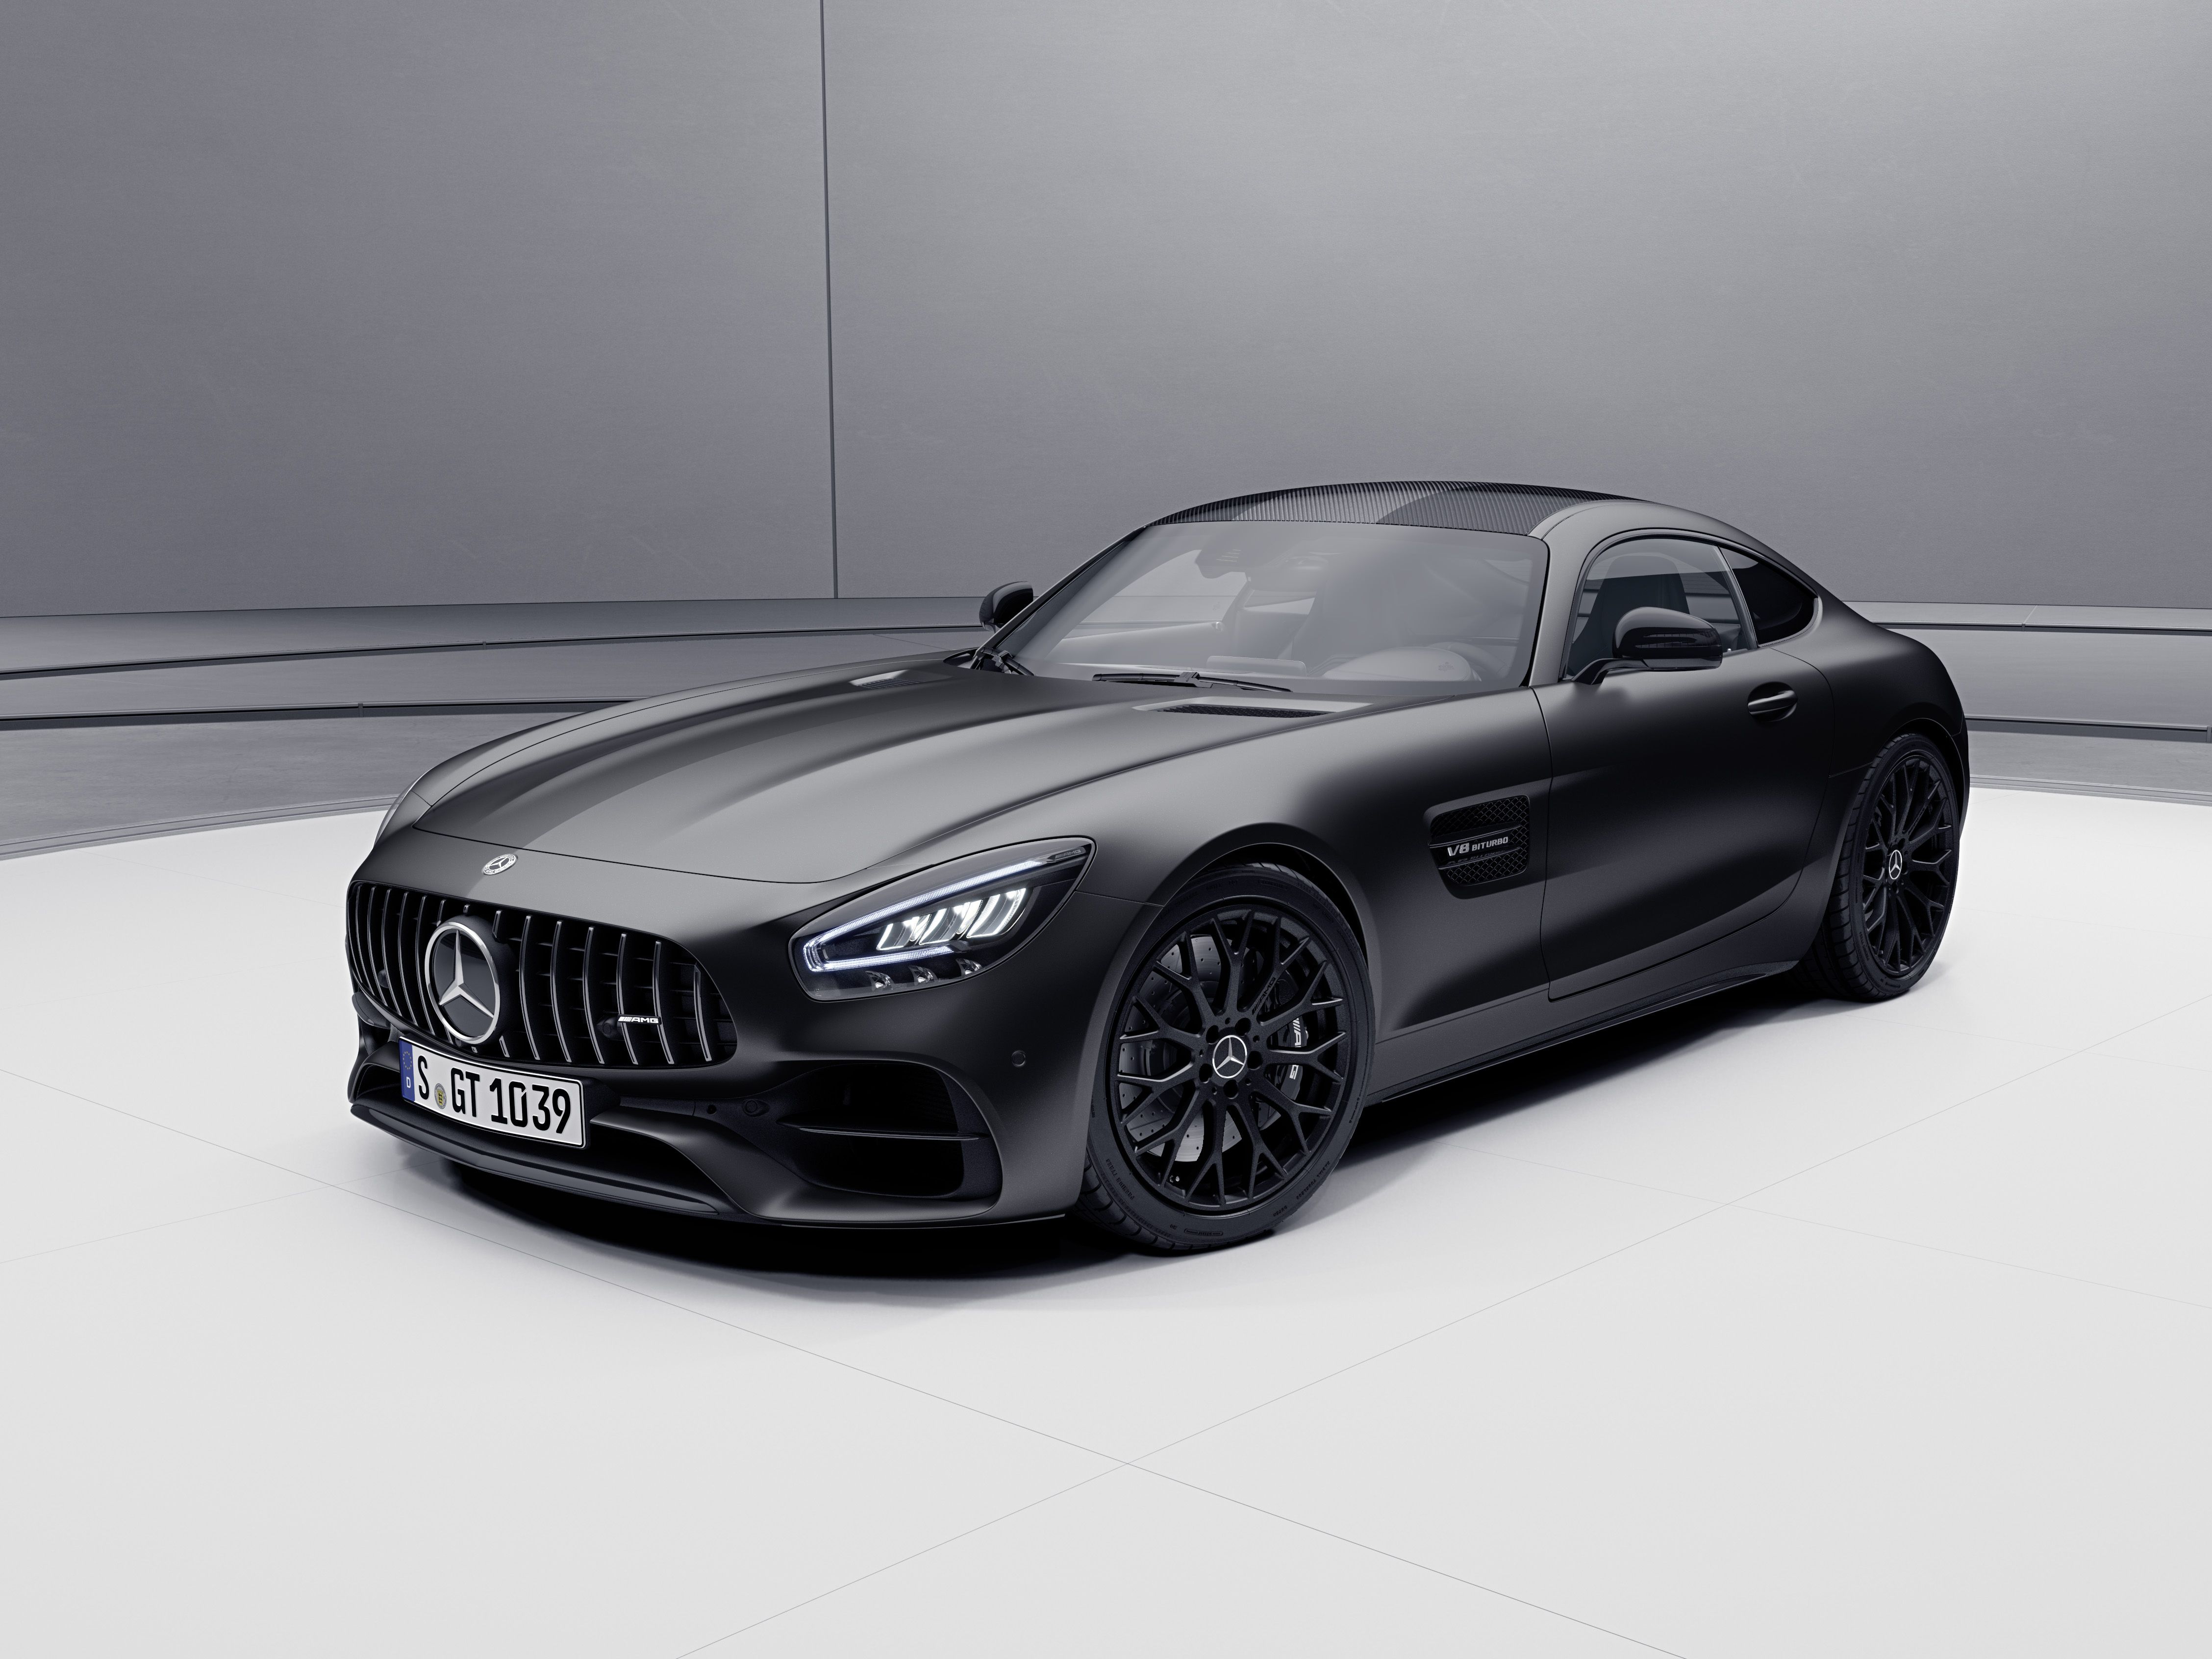 2021 Mercedes-AMG GT Coupe and Roadster Get More Power